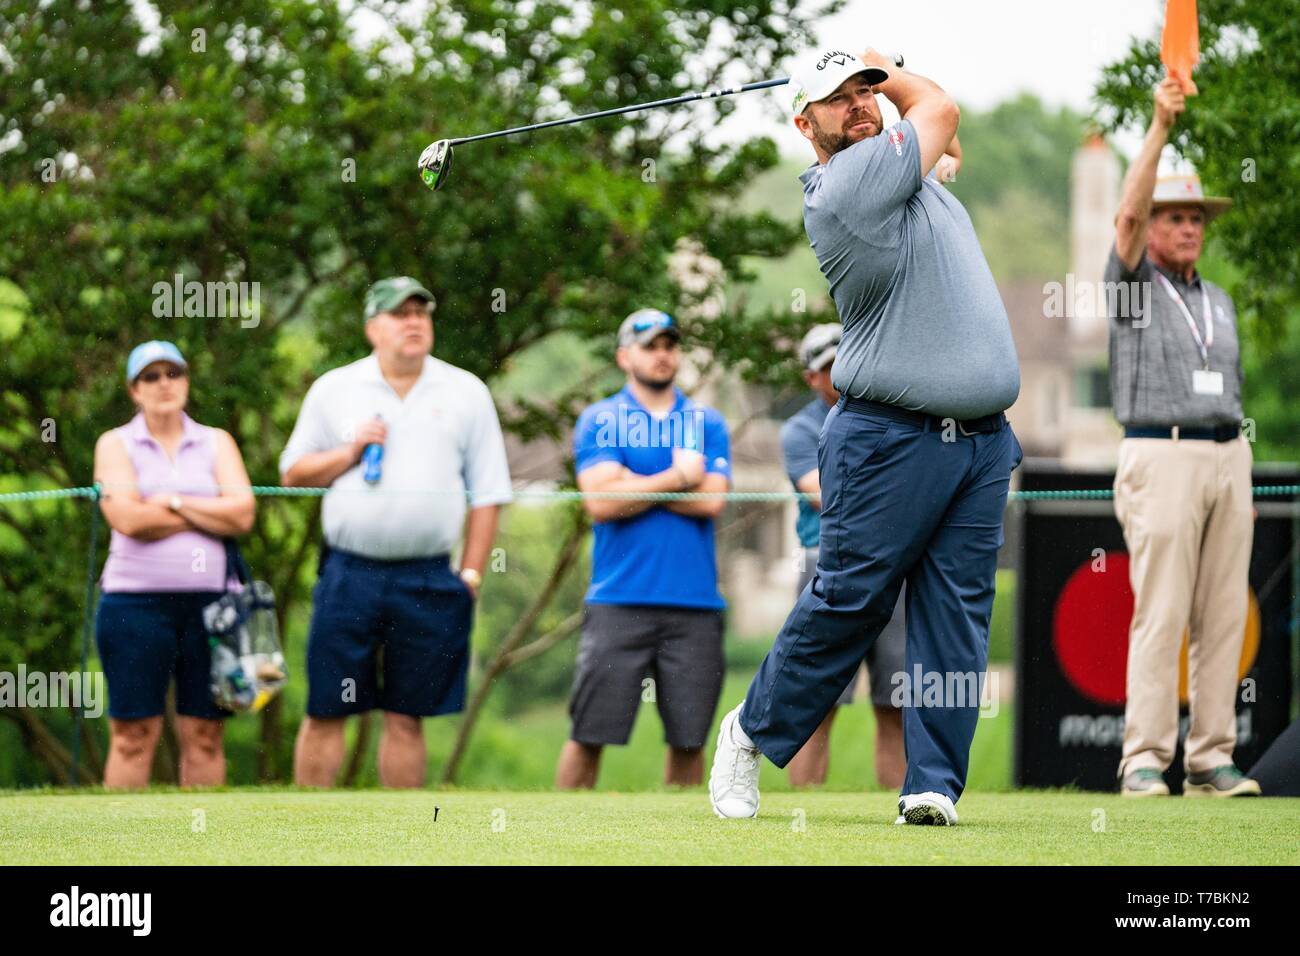 Charlotte, NC, USA. 5th May 2019. Colt Knost during the PGA Tour Wells Fargo Championship on Sunday May 5, 2019 at Quail Hollow Country Club in Charlotte, NC. Jacob Kupferman/CSM Credit: Cal Sport Media/Alamy Live News Stock Photo